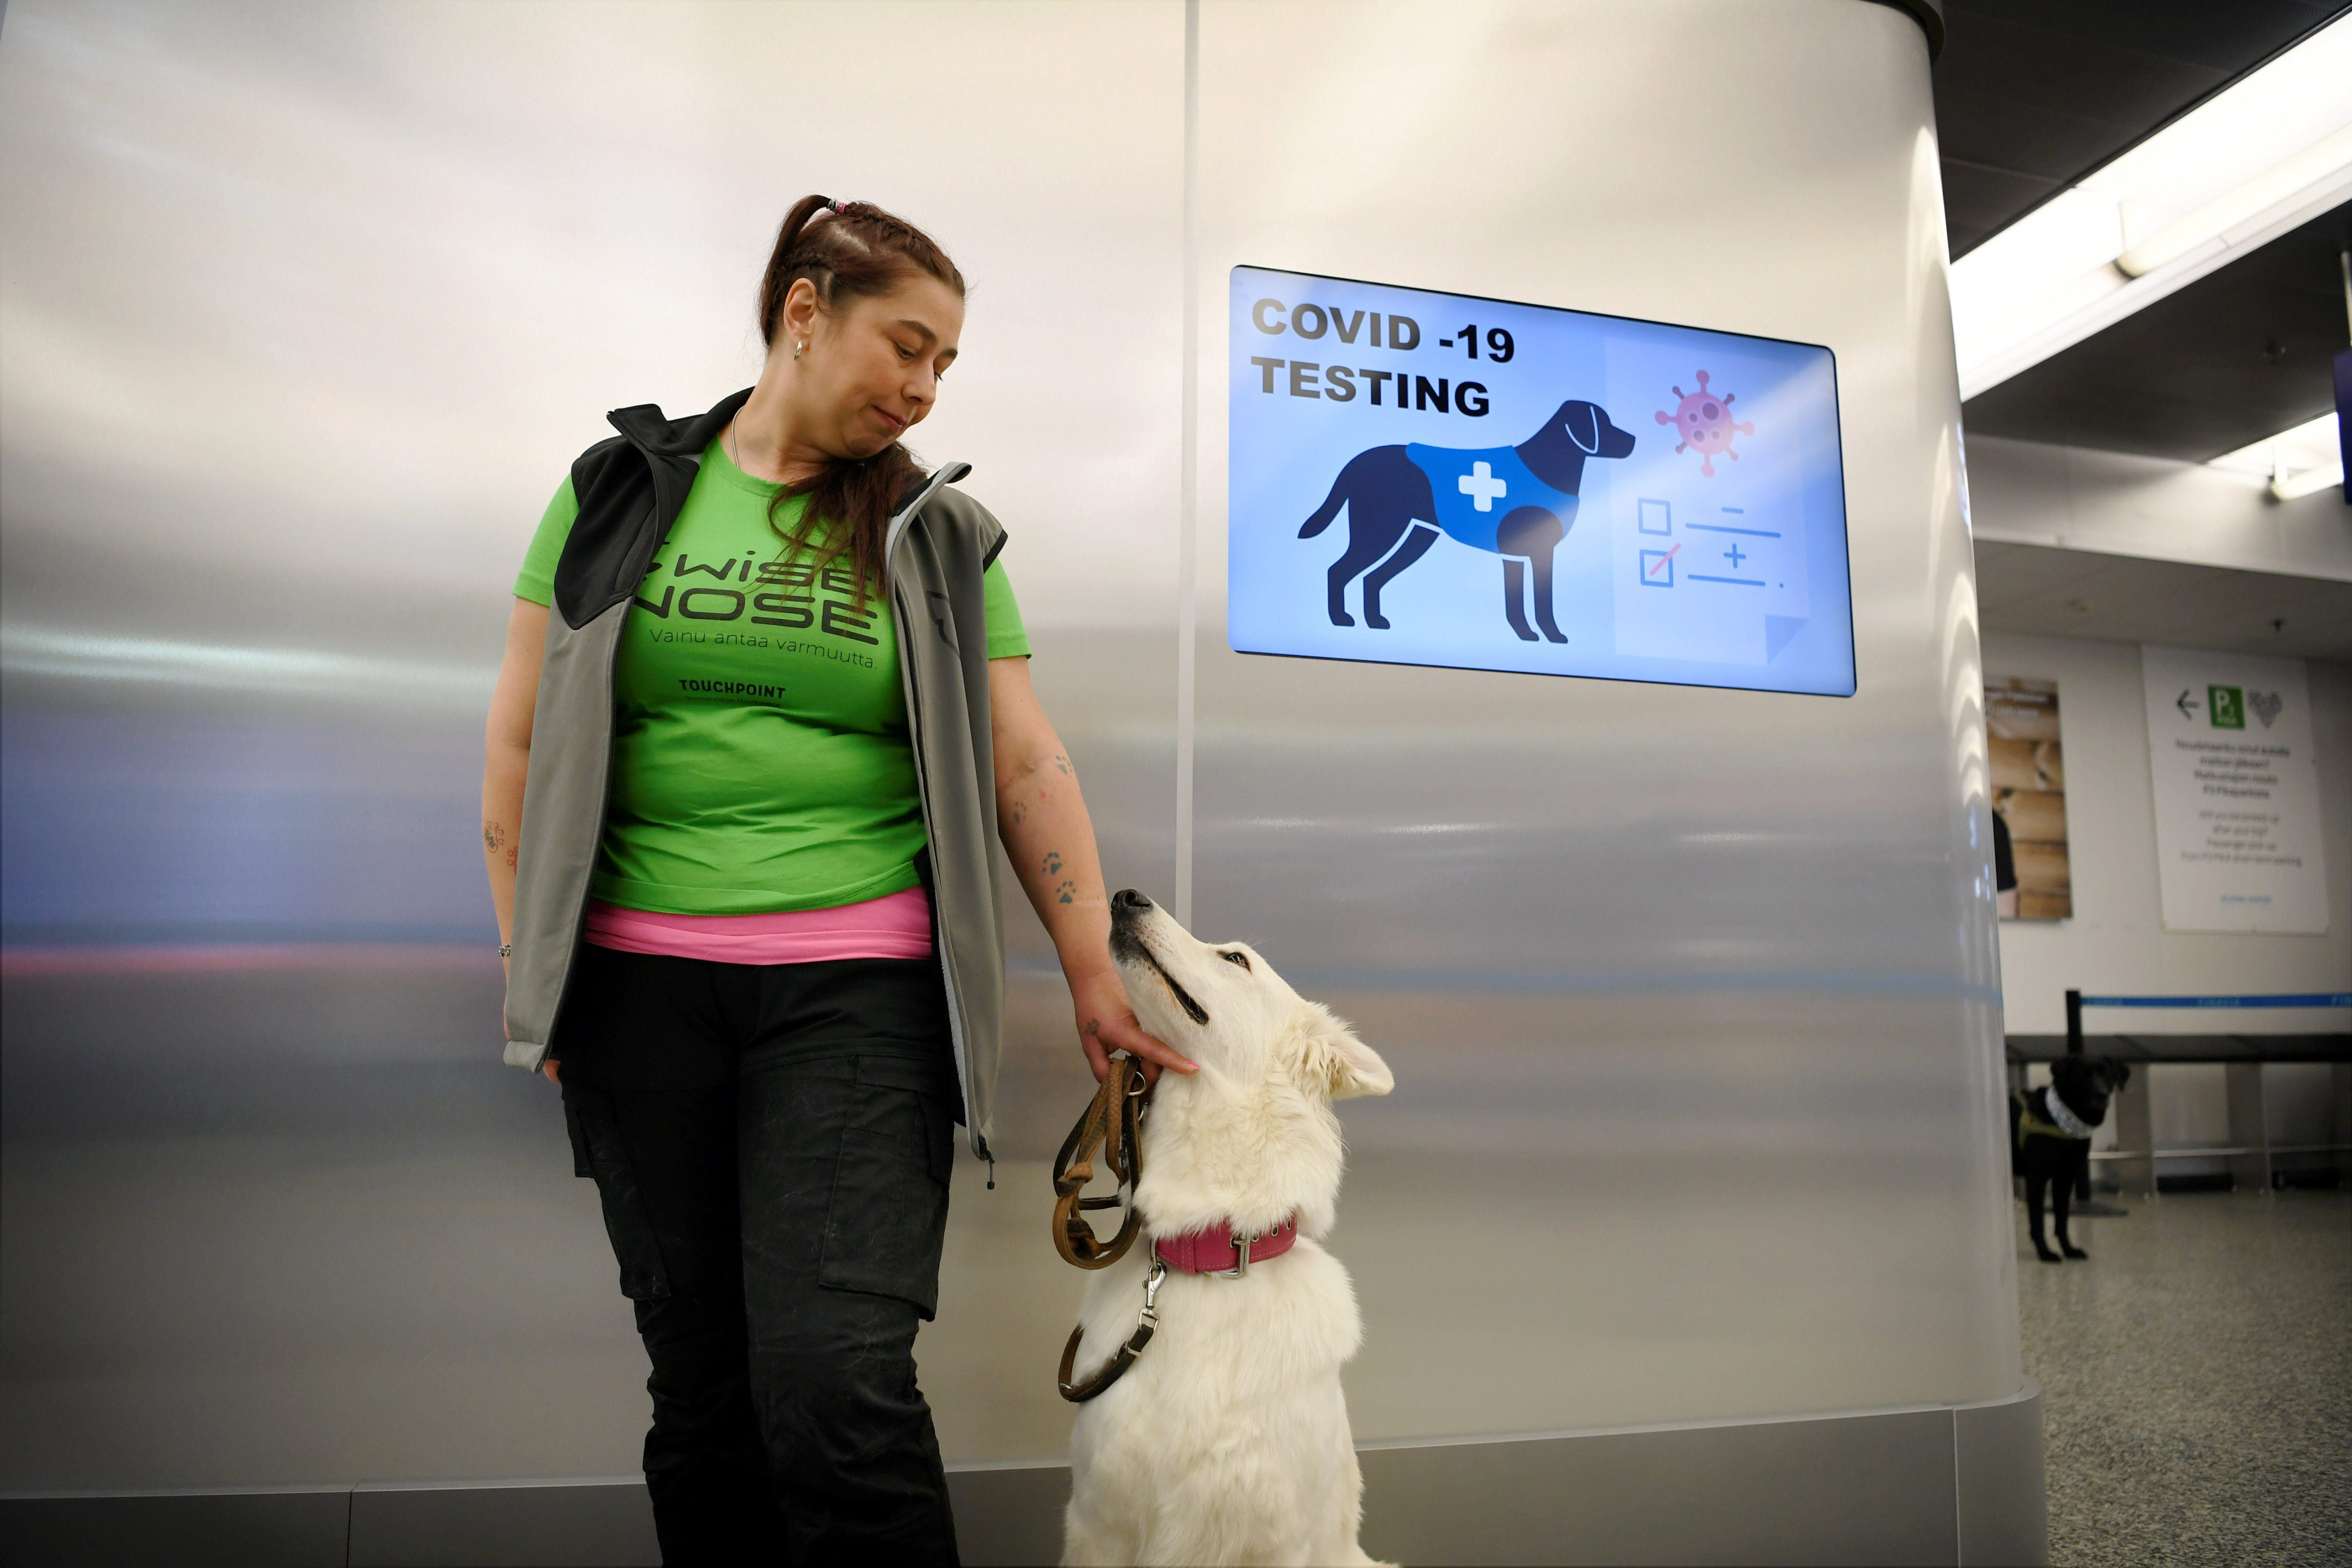 The coronavirus sniffer dog named E.T. receives a cuddle from the trainer Anette Kare at the Helsinki airport in Vantaa, Finland, where he is trained to detect the COVID-19 from the arriving passengers, on September 22, 2020